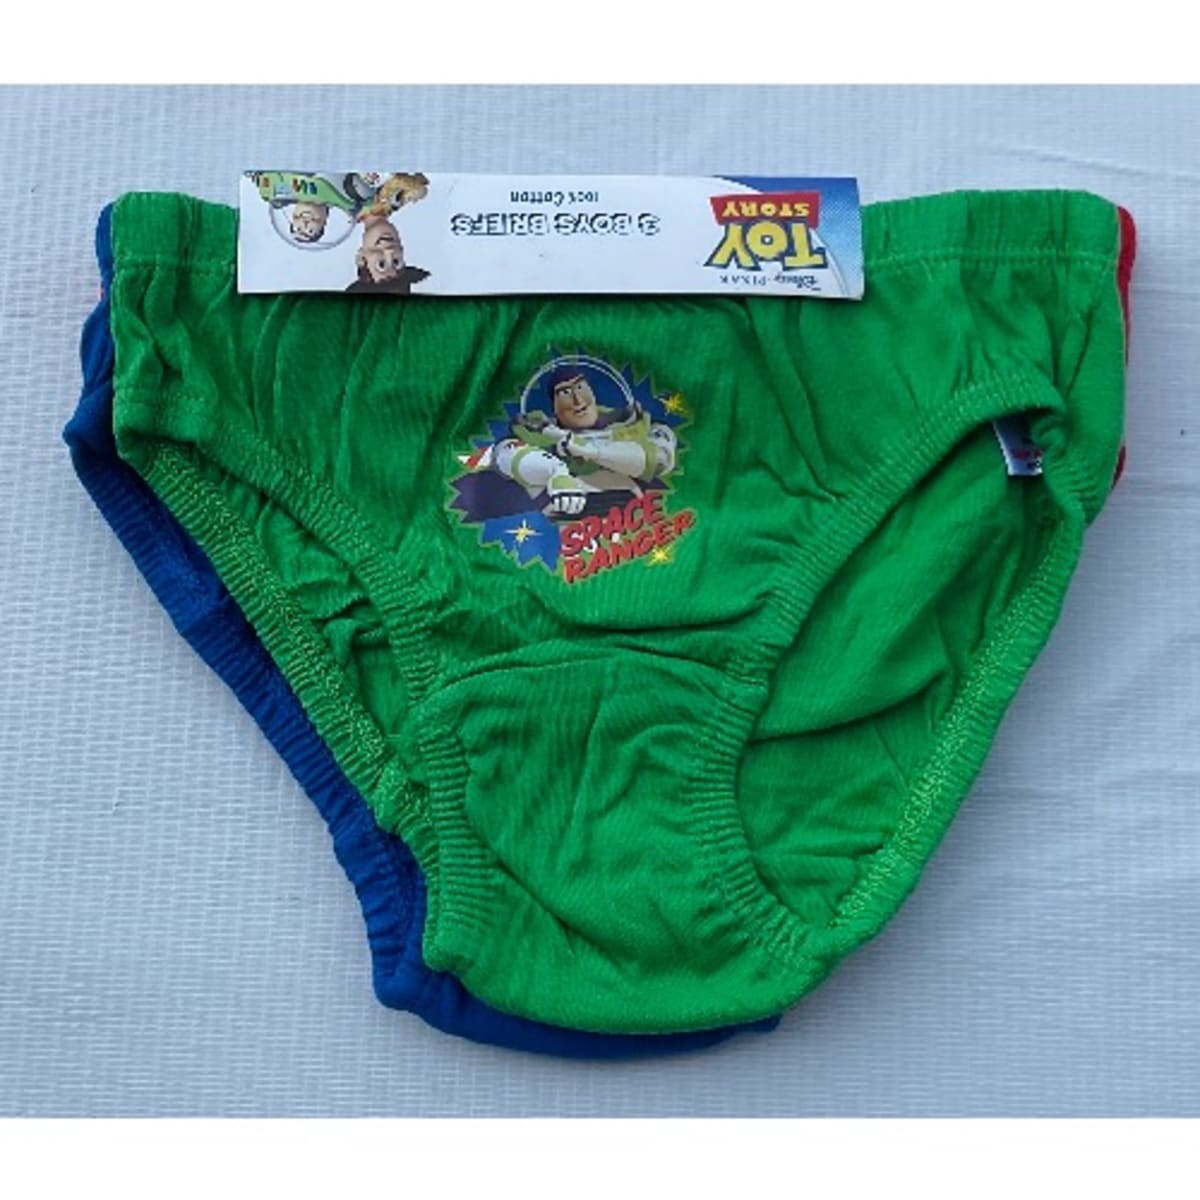 Disney Pack Of 3 Toy Story Boys Briefs